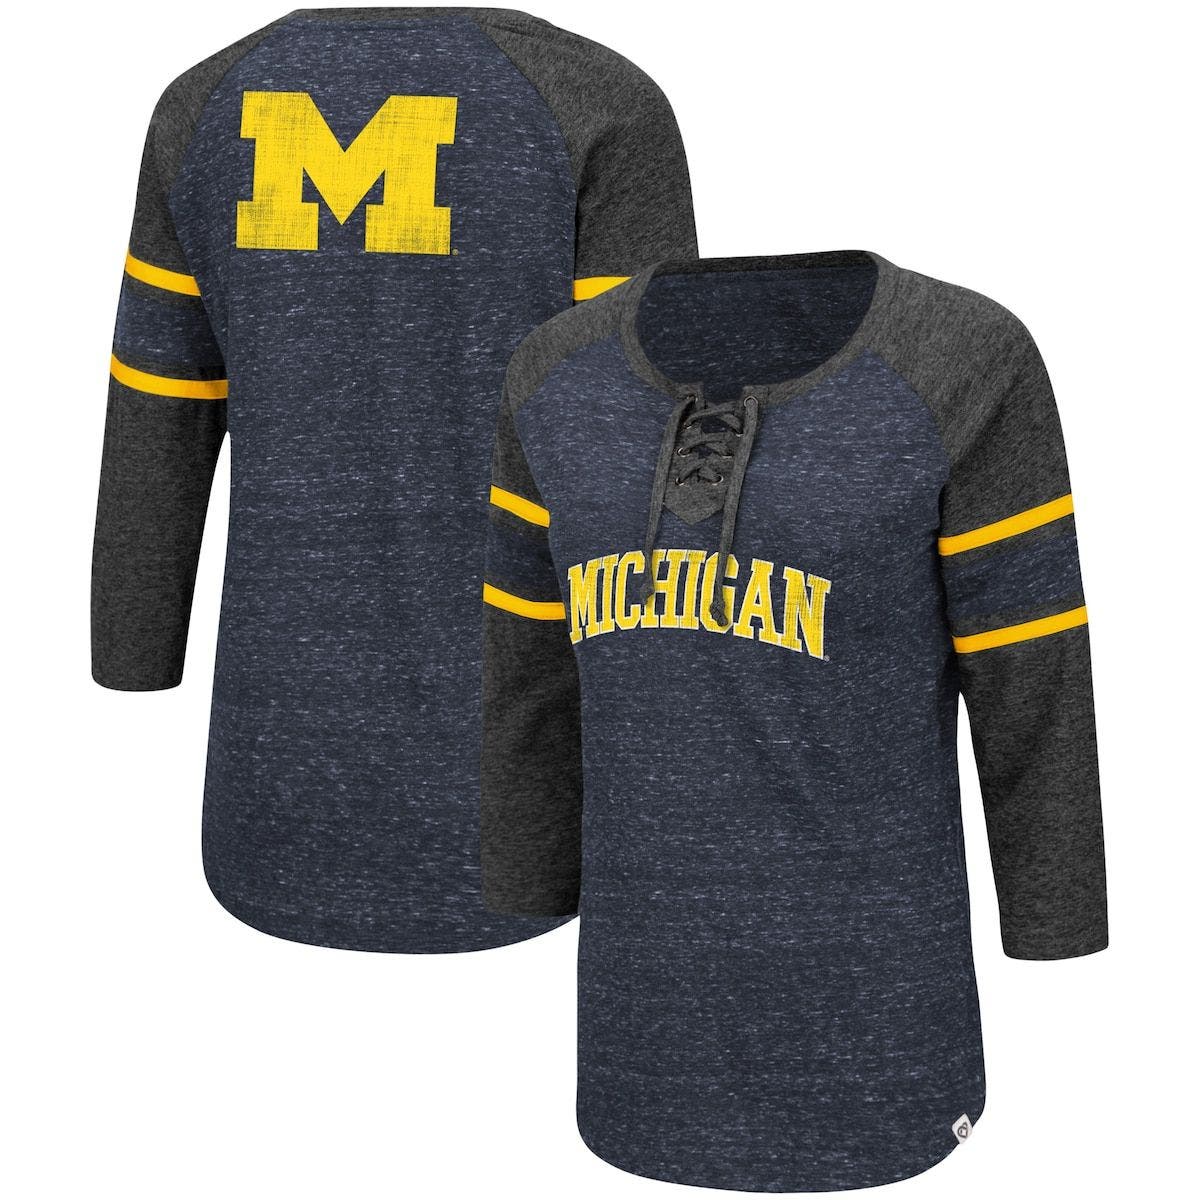 NCAA Michigan Wolverines Covered Long Neck Bottle Open 